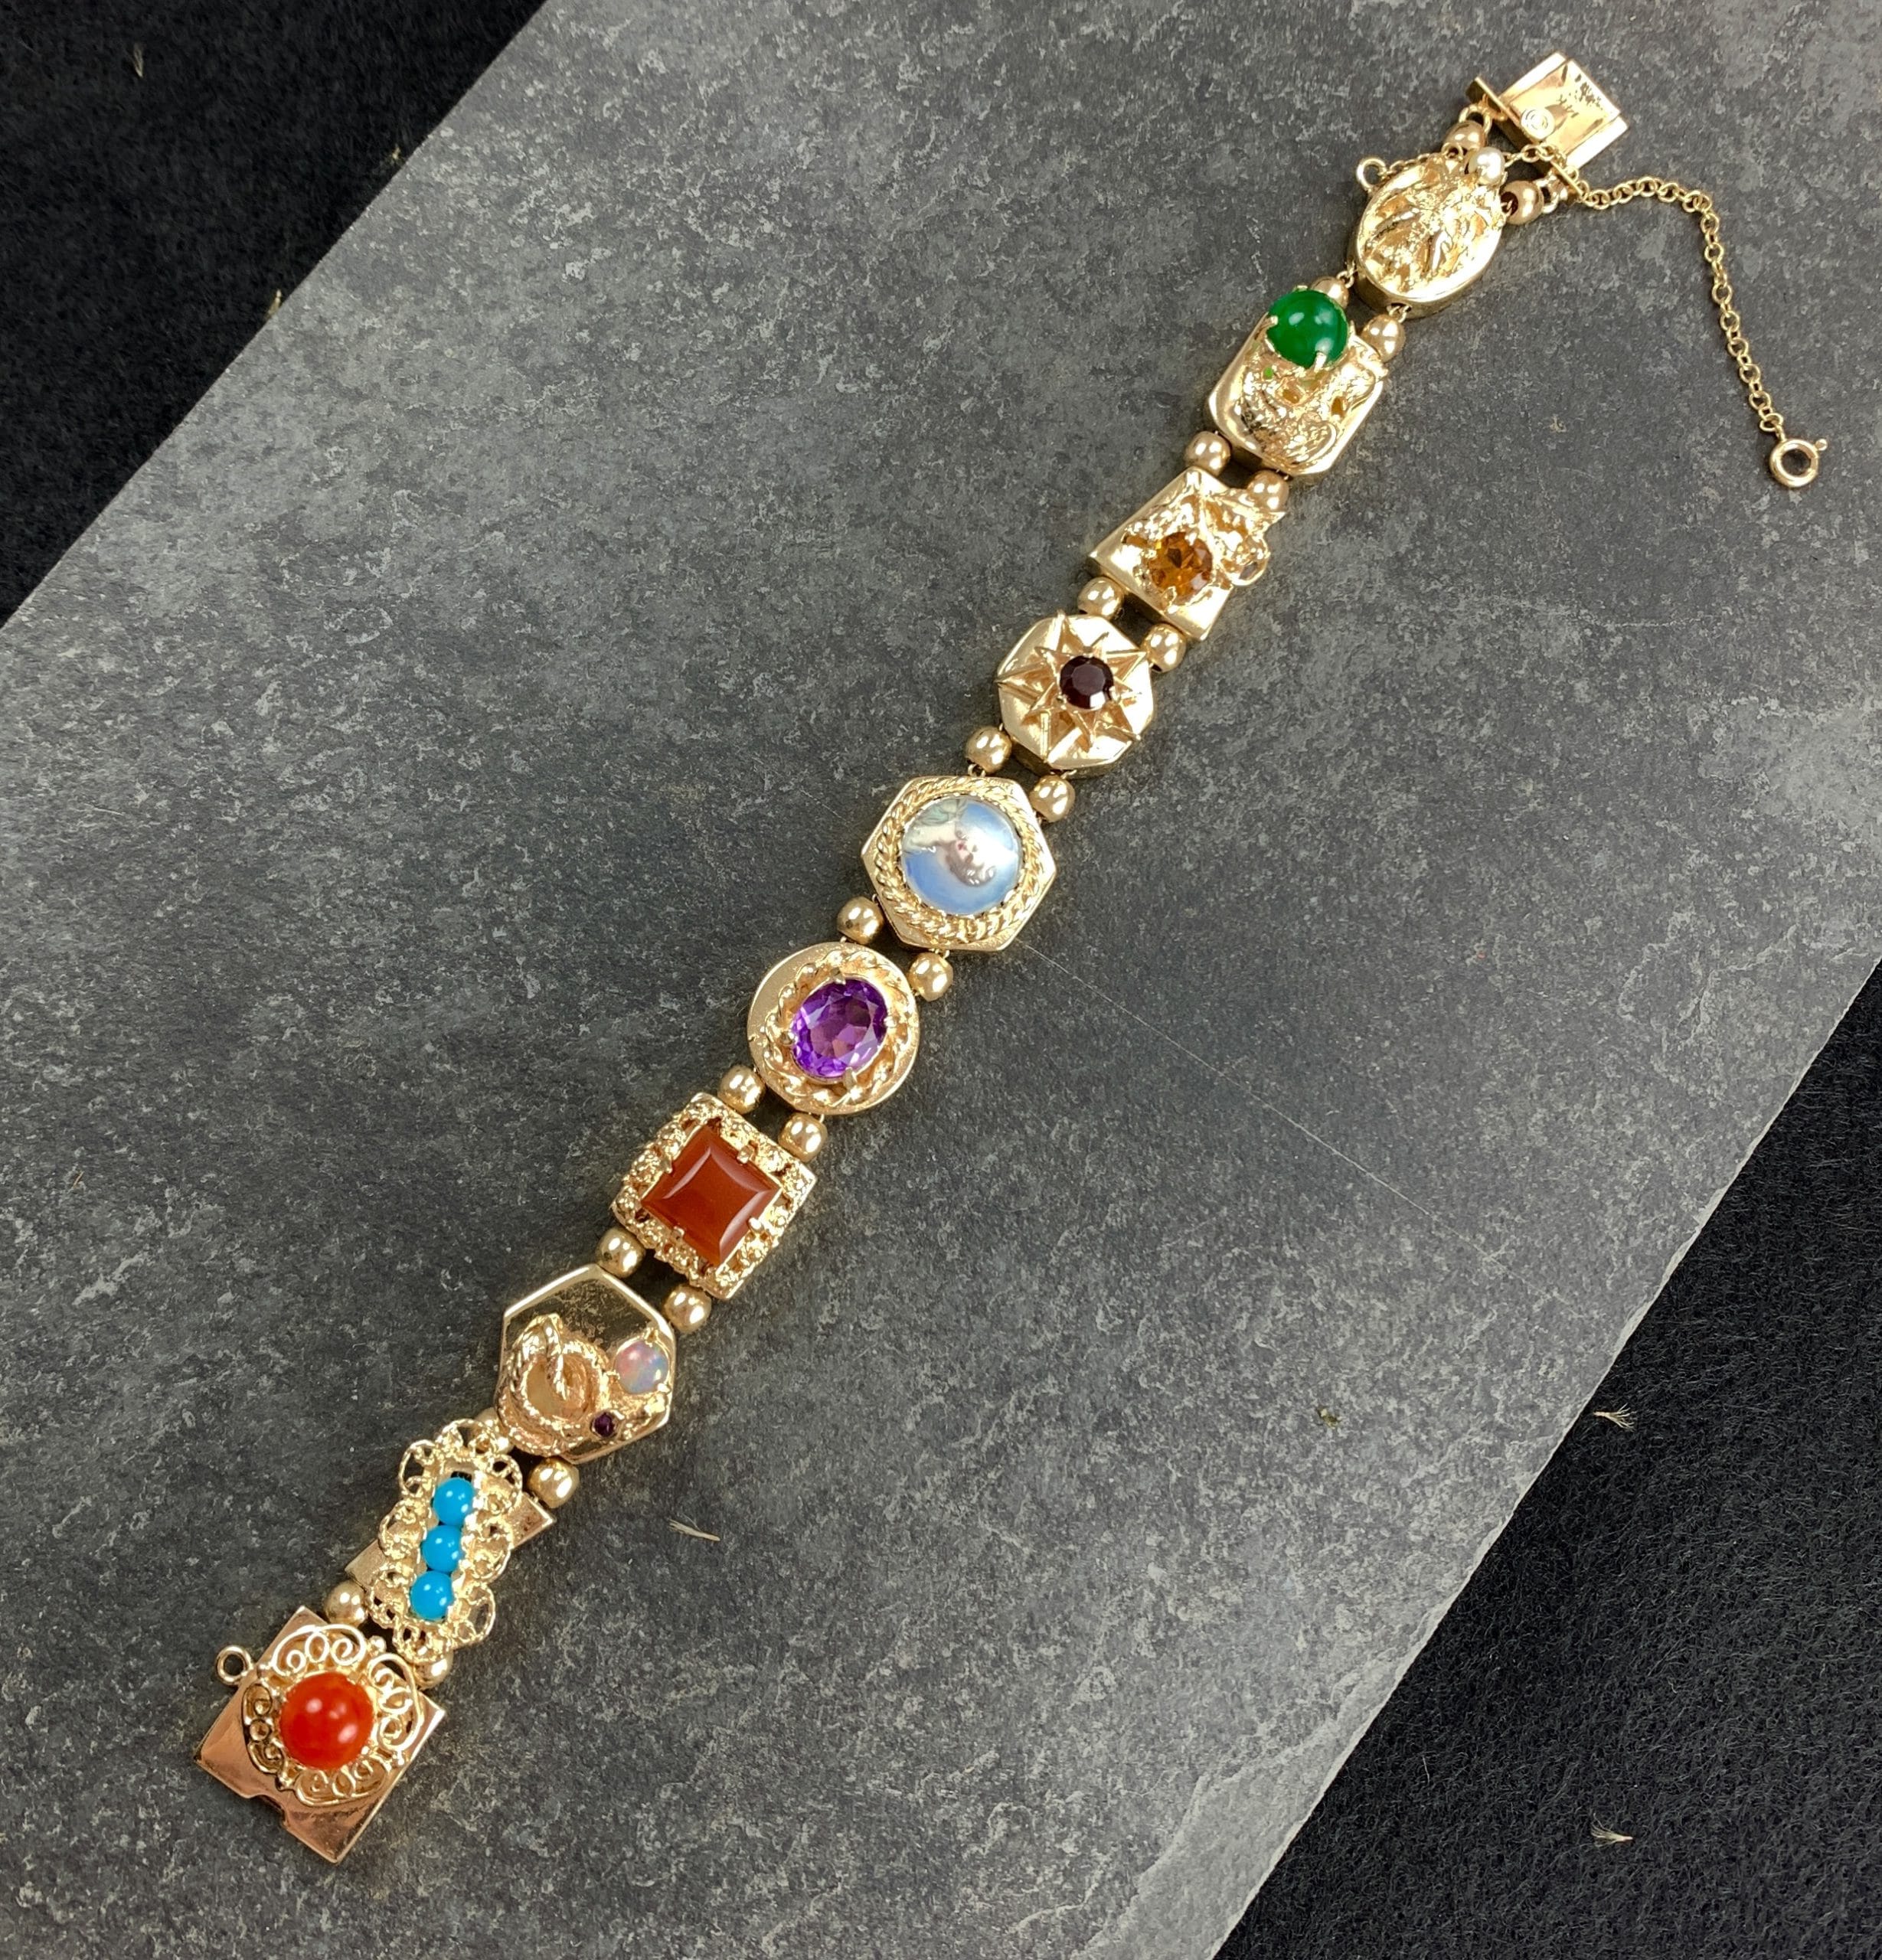 Enamel Yellow with MO (A2486) Vintage Jewelers 14k | Bend Stone Multi | Gems - Bracelet and Groves, | Artistic 63119 7821 Gold Summit in Big Blvd. Webster